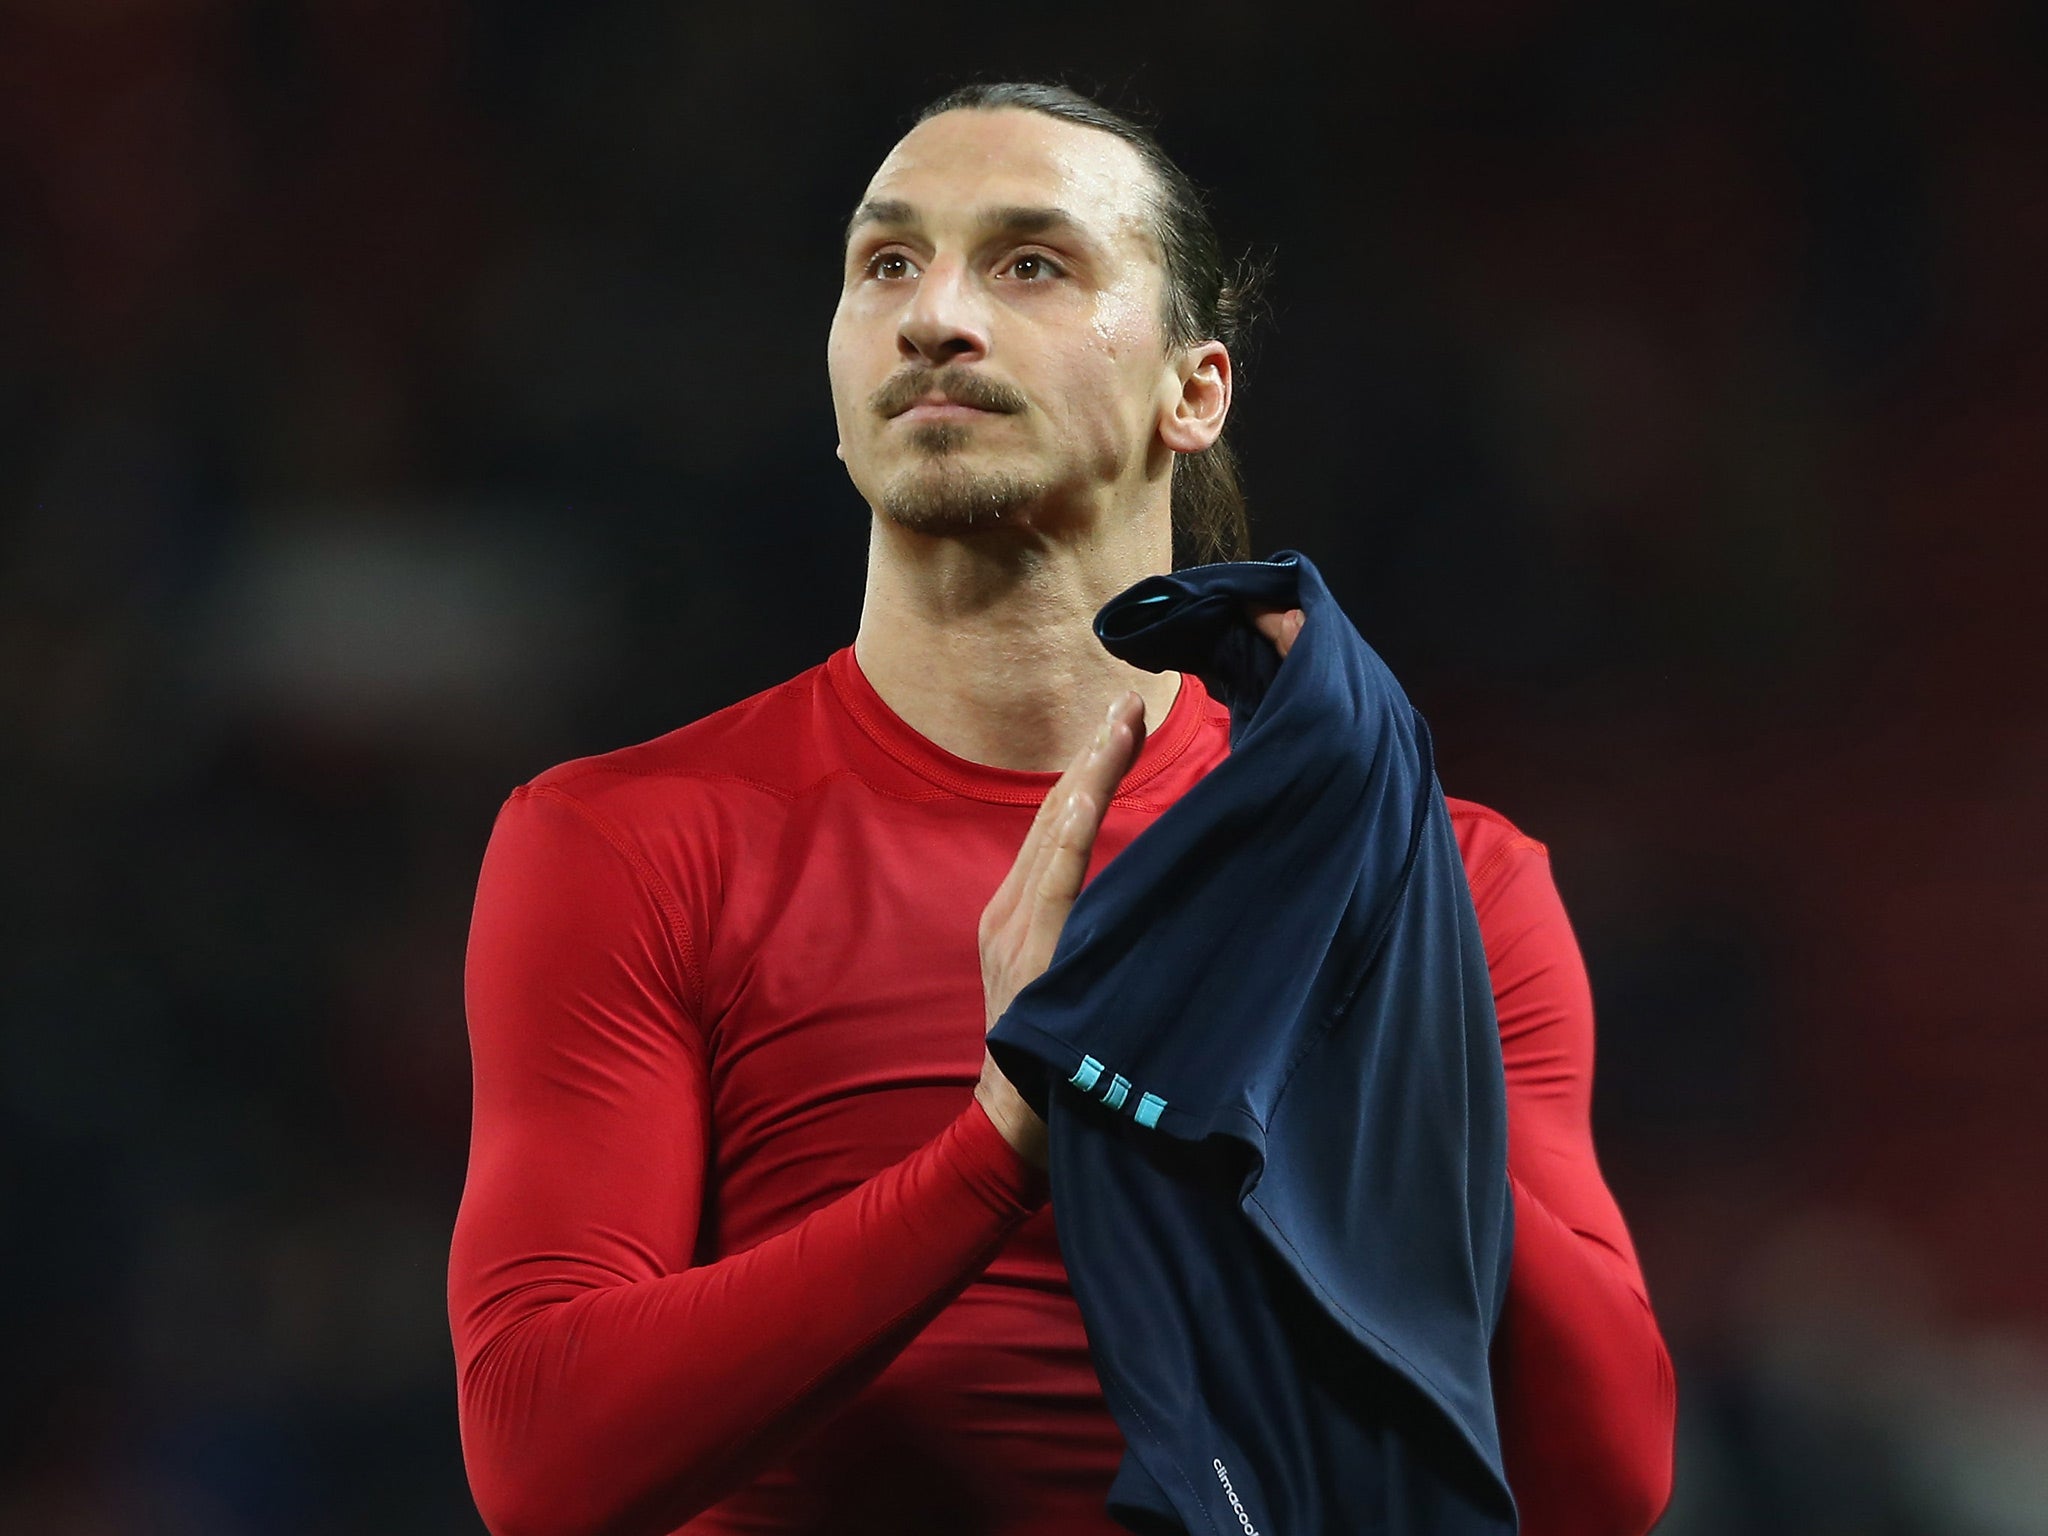 Ibrahimovic believes, at 35-years-old, he still has plenty left in the tank